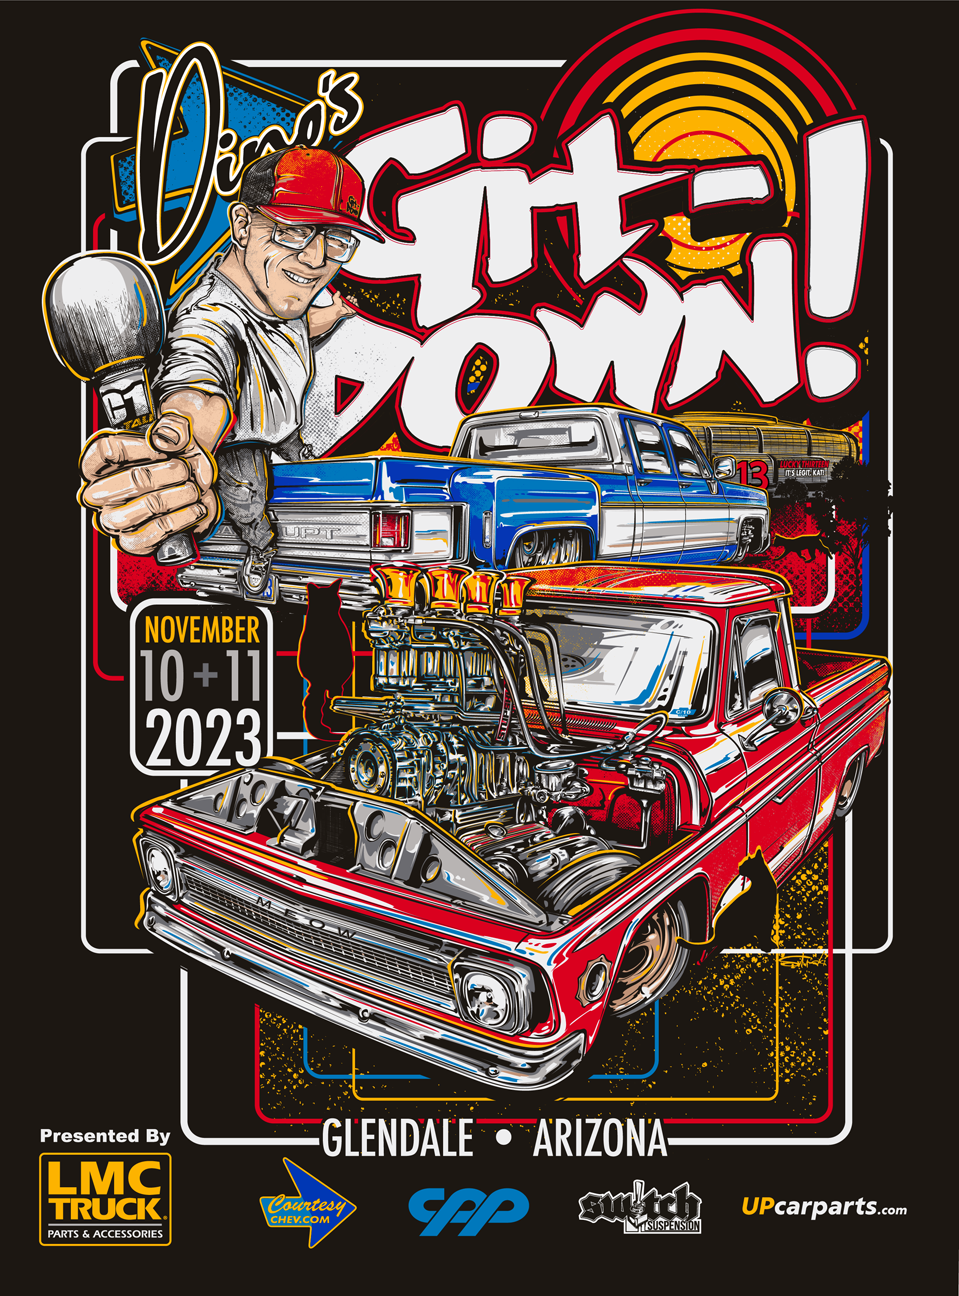 Event Poster Dino's Git Down 2023